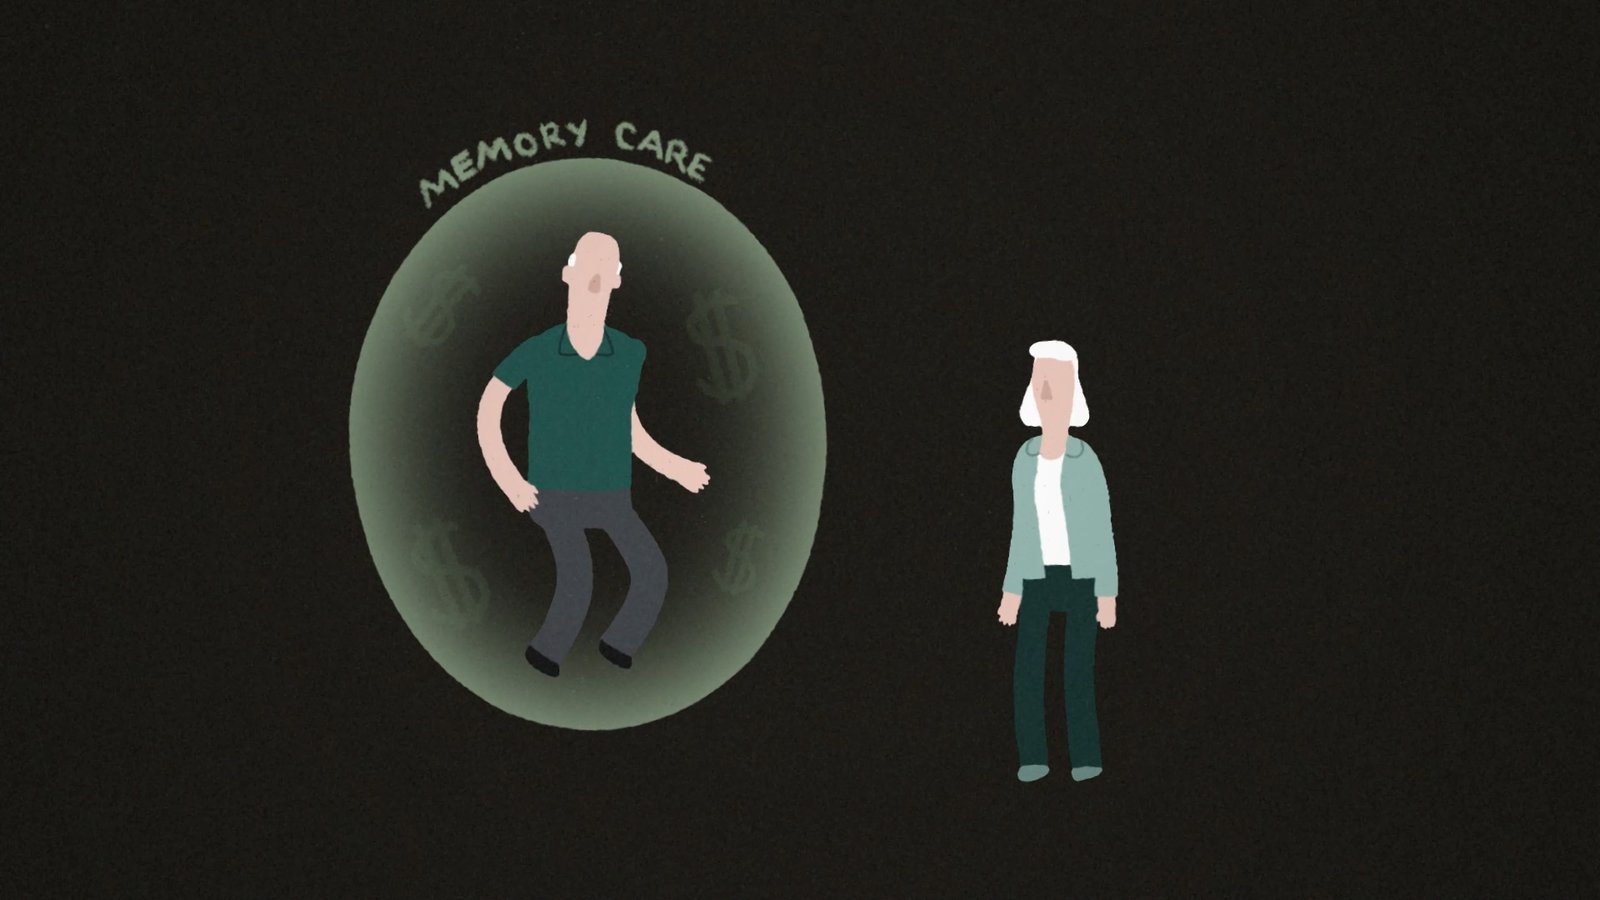 lead image for animated video about a crisis in caregiving in Pennsylvania